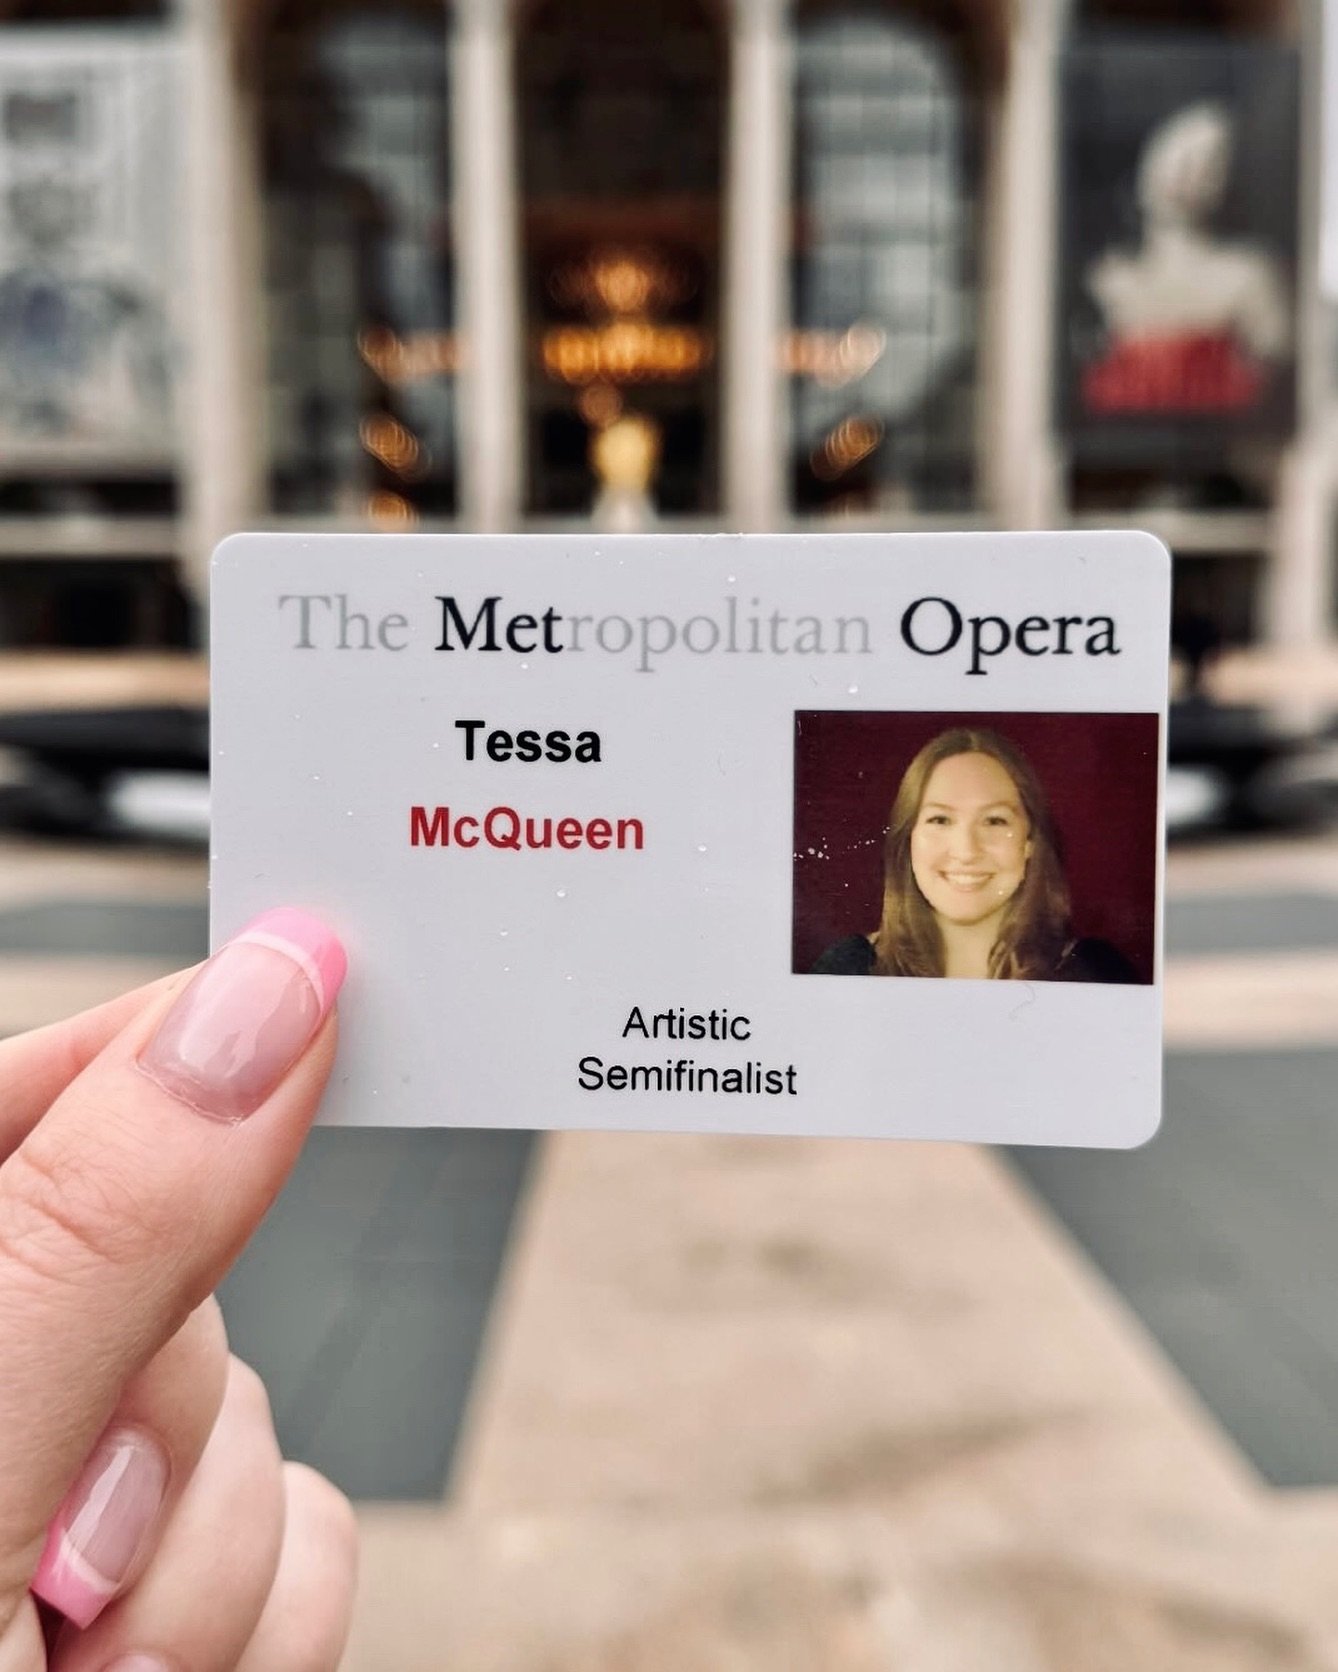 Cheering on alumna soprano Tessa McQueen who will perform onstage at The Metropolitan Opera as a semifinalist in the The Metropolitan Opera Laffont Competition on Monday. A free livestream begins at 10am on laffont.kiswe.com ⭐️